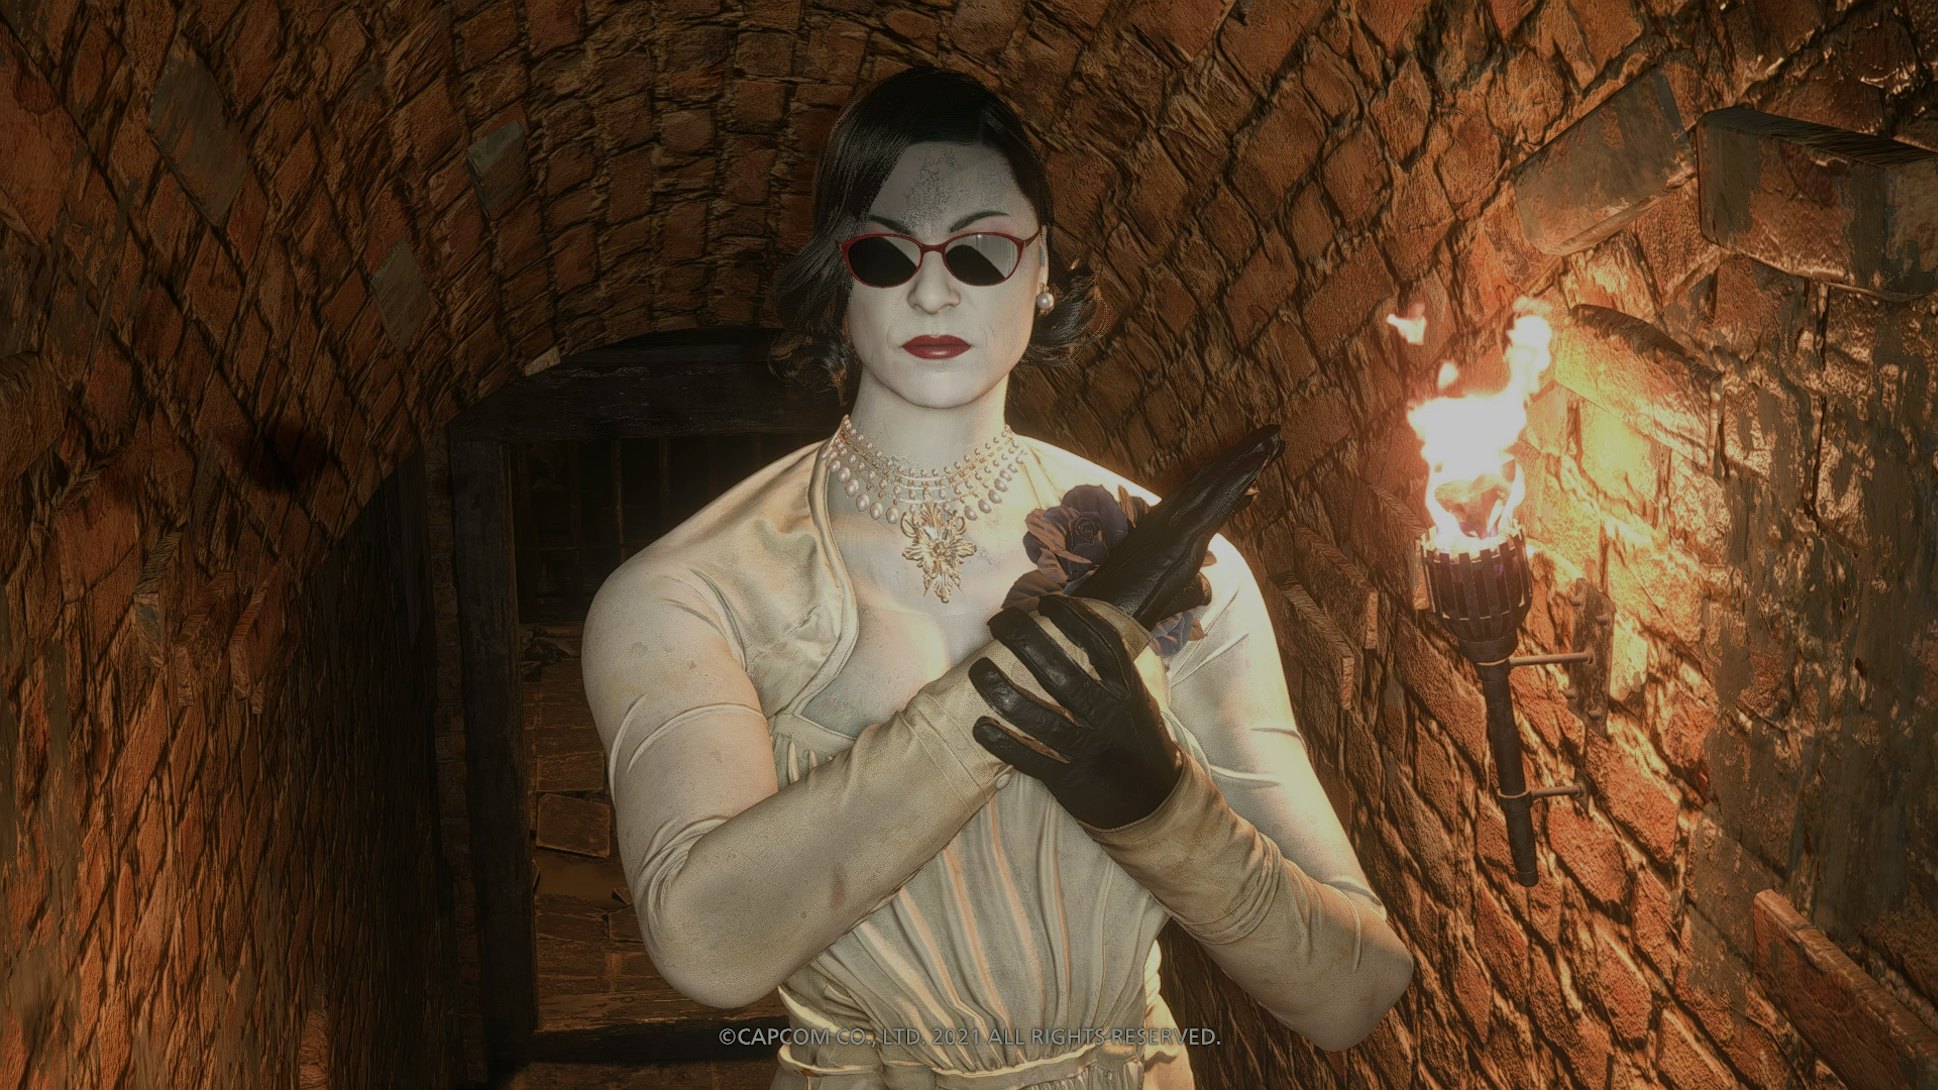 Lady Dimitrescu in Resident Evil Village. Games. Video games. Gaming. Modding. Modders. 